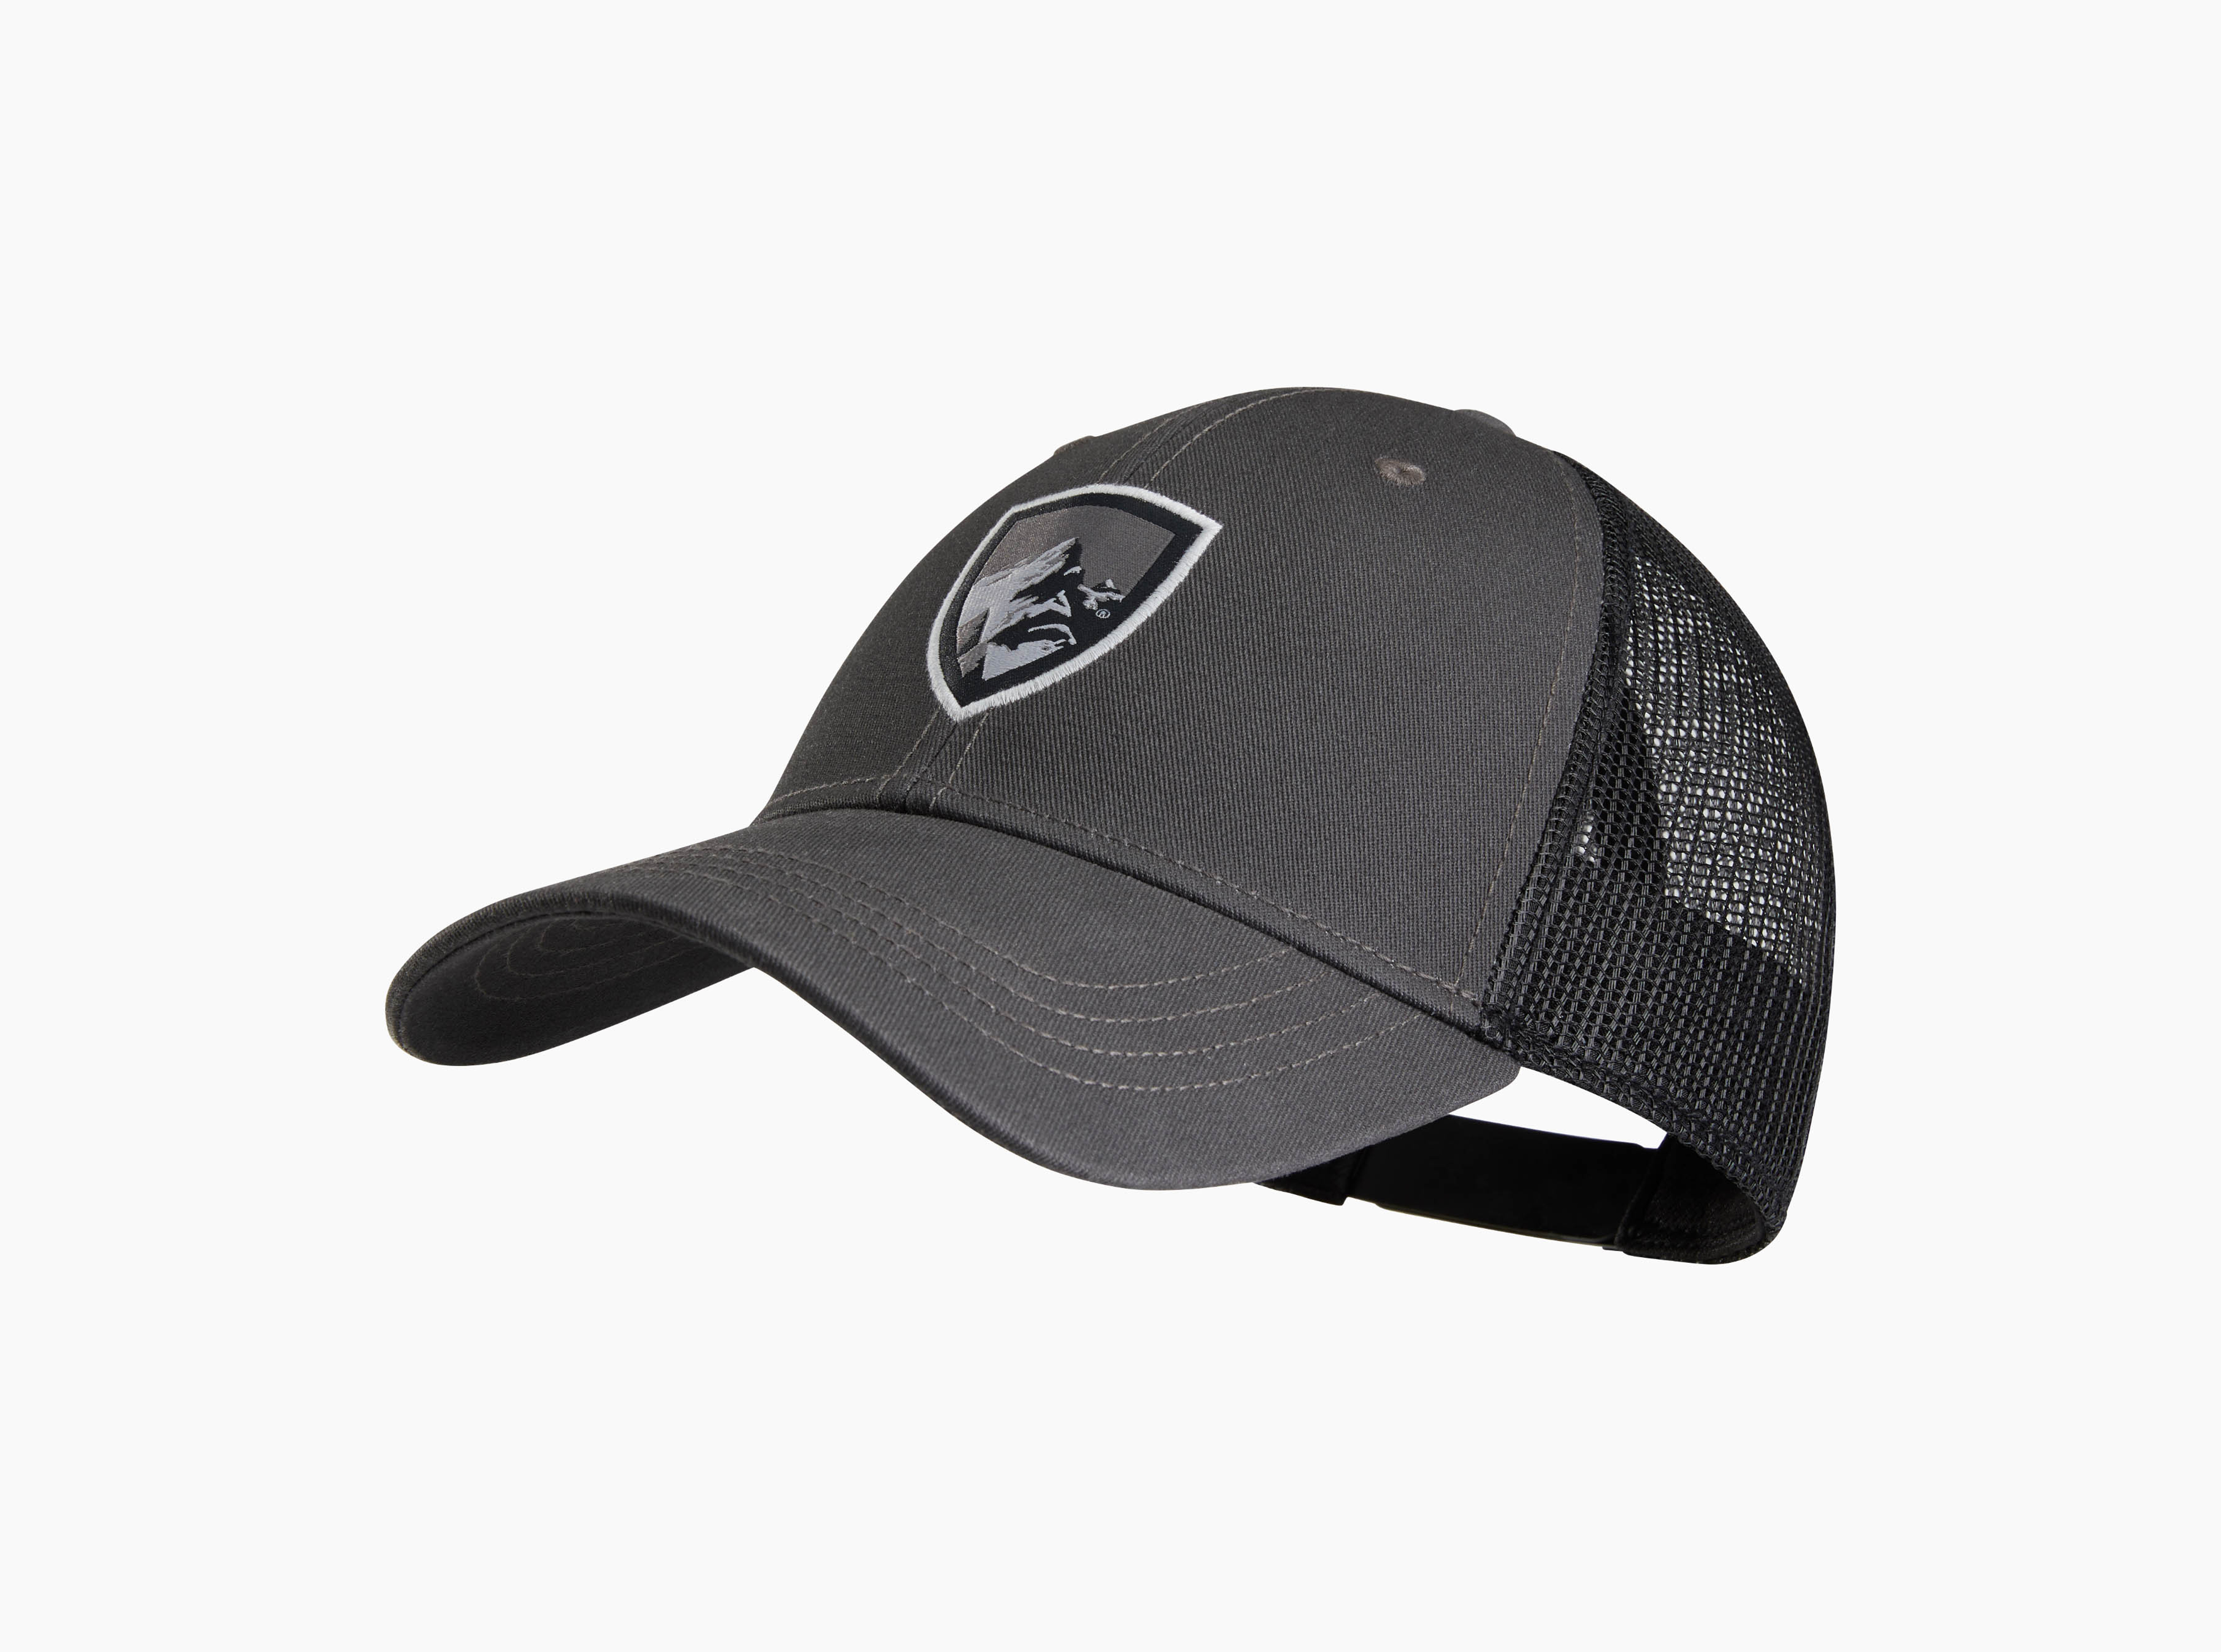 Chandeleur Outfitters - You'll look cool in this Kuhl Trucker Hat